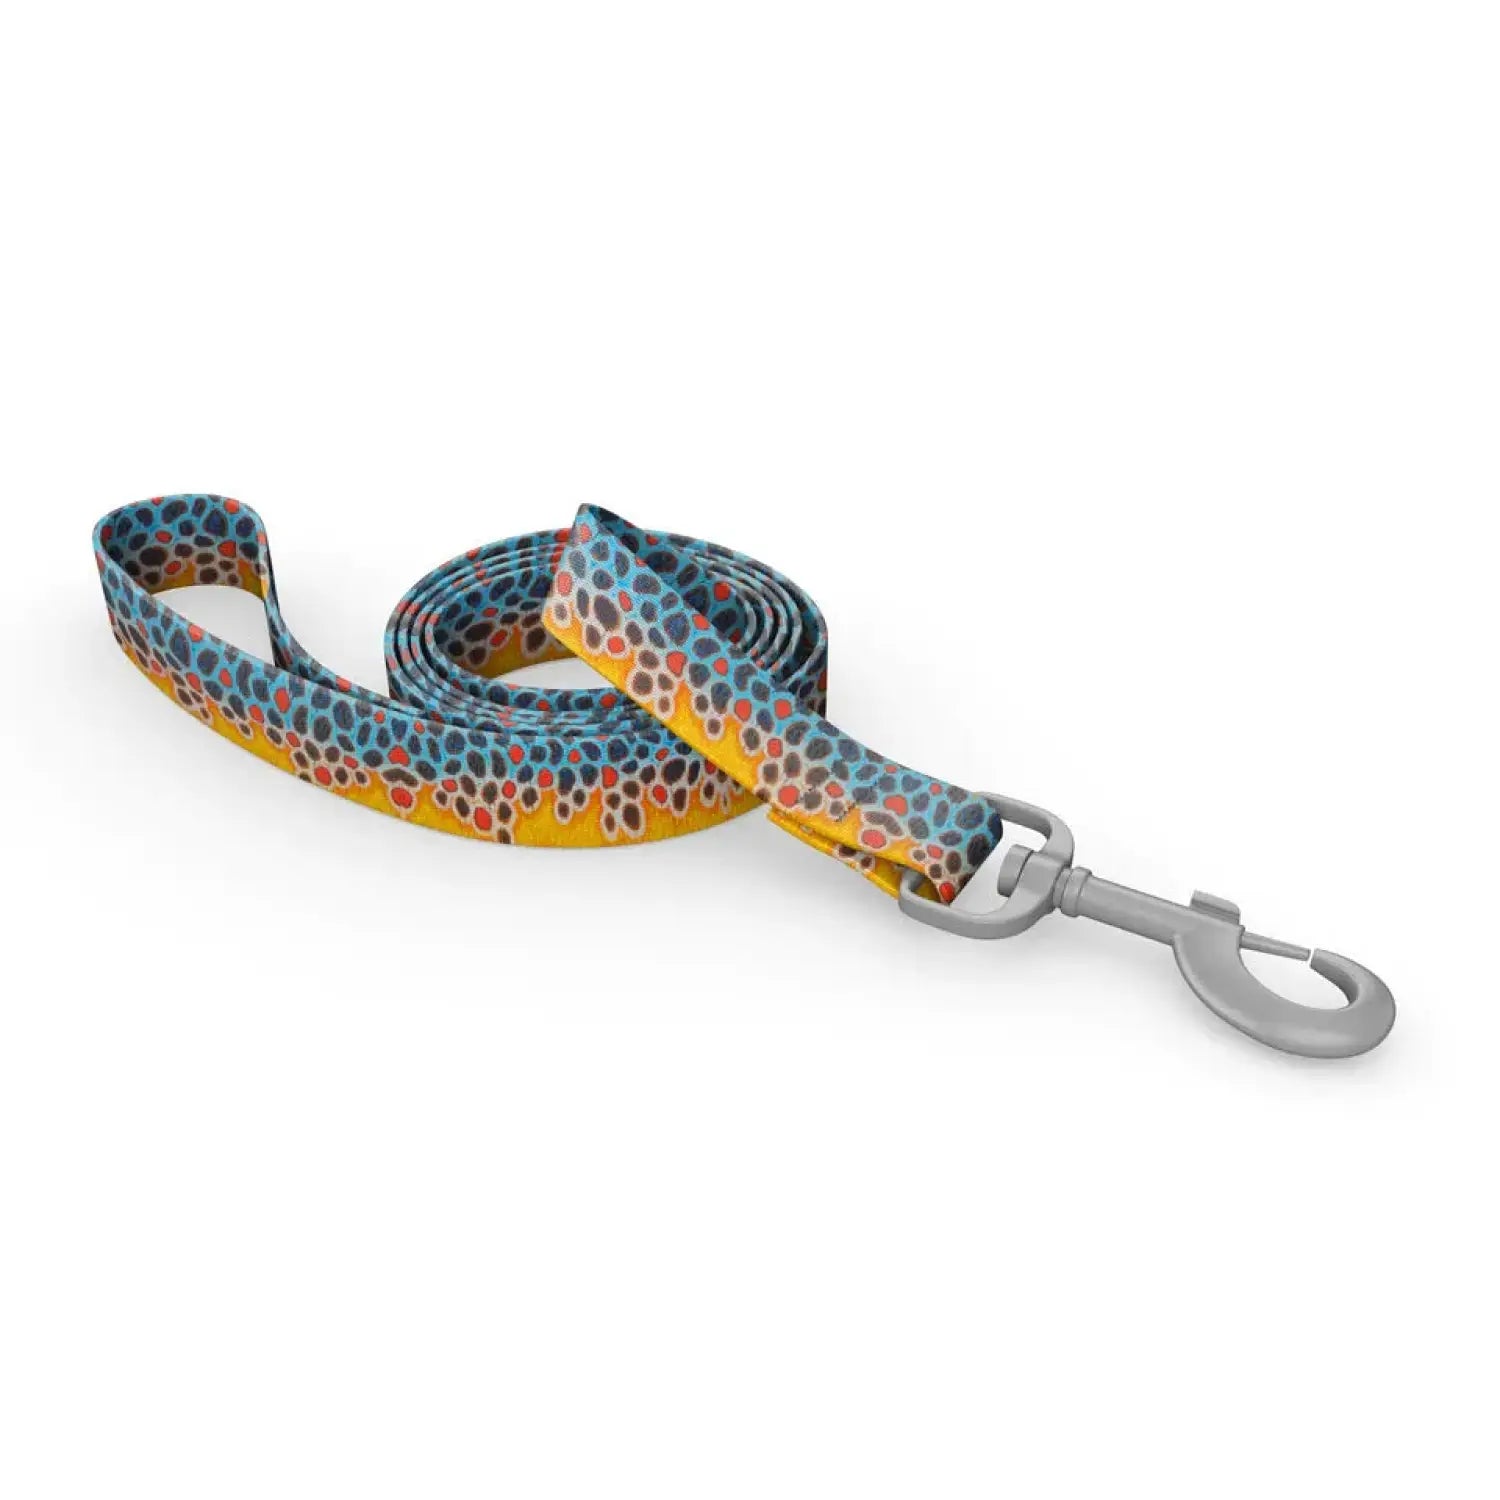 Wingo Outdoors Dog Leash in DeYoung Brook Trout design. Bright red, yellow, and blues.